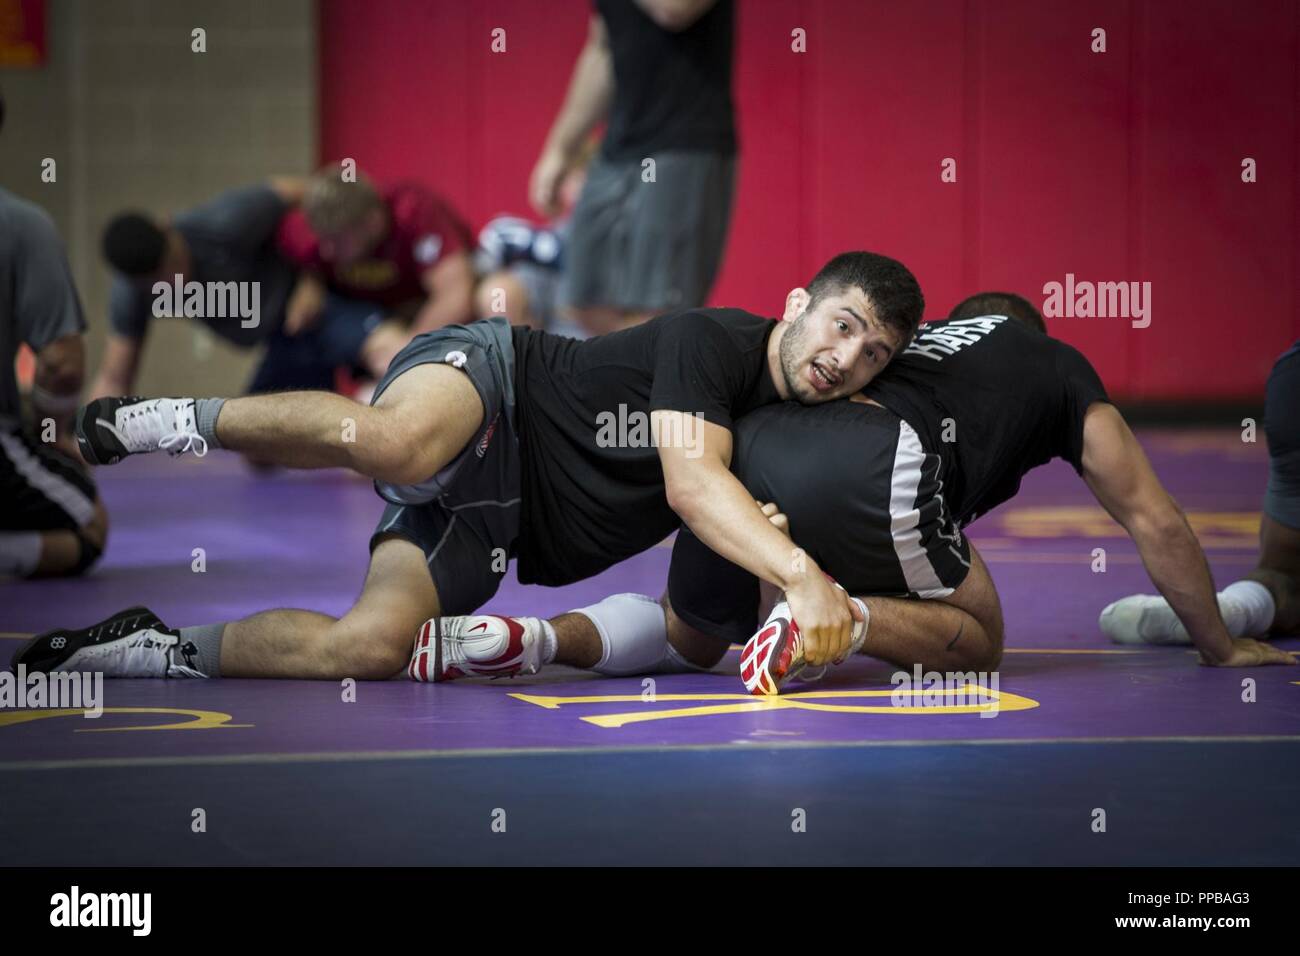 Isaiah Martinez, left, wrestler, USA Wrestling Men’s Freestyle World Team, attempts to subdue his training partner at the 43 Fitness Center at Marine Corps Base Camp Pendleton, California, Aug. 20, 2018. Prior to training the wrestlers warm-up, which included a series of roles, work-outs and stretches, helped them maintain flexibility and avoid potential injuries caused by tight muscles. Stock Photo